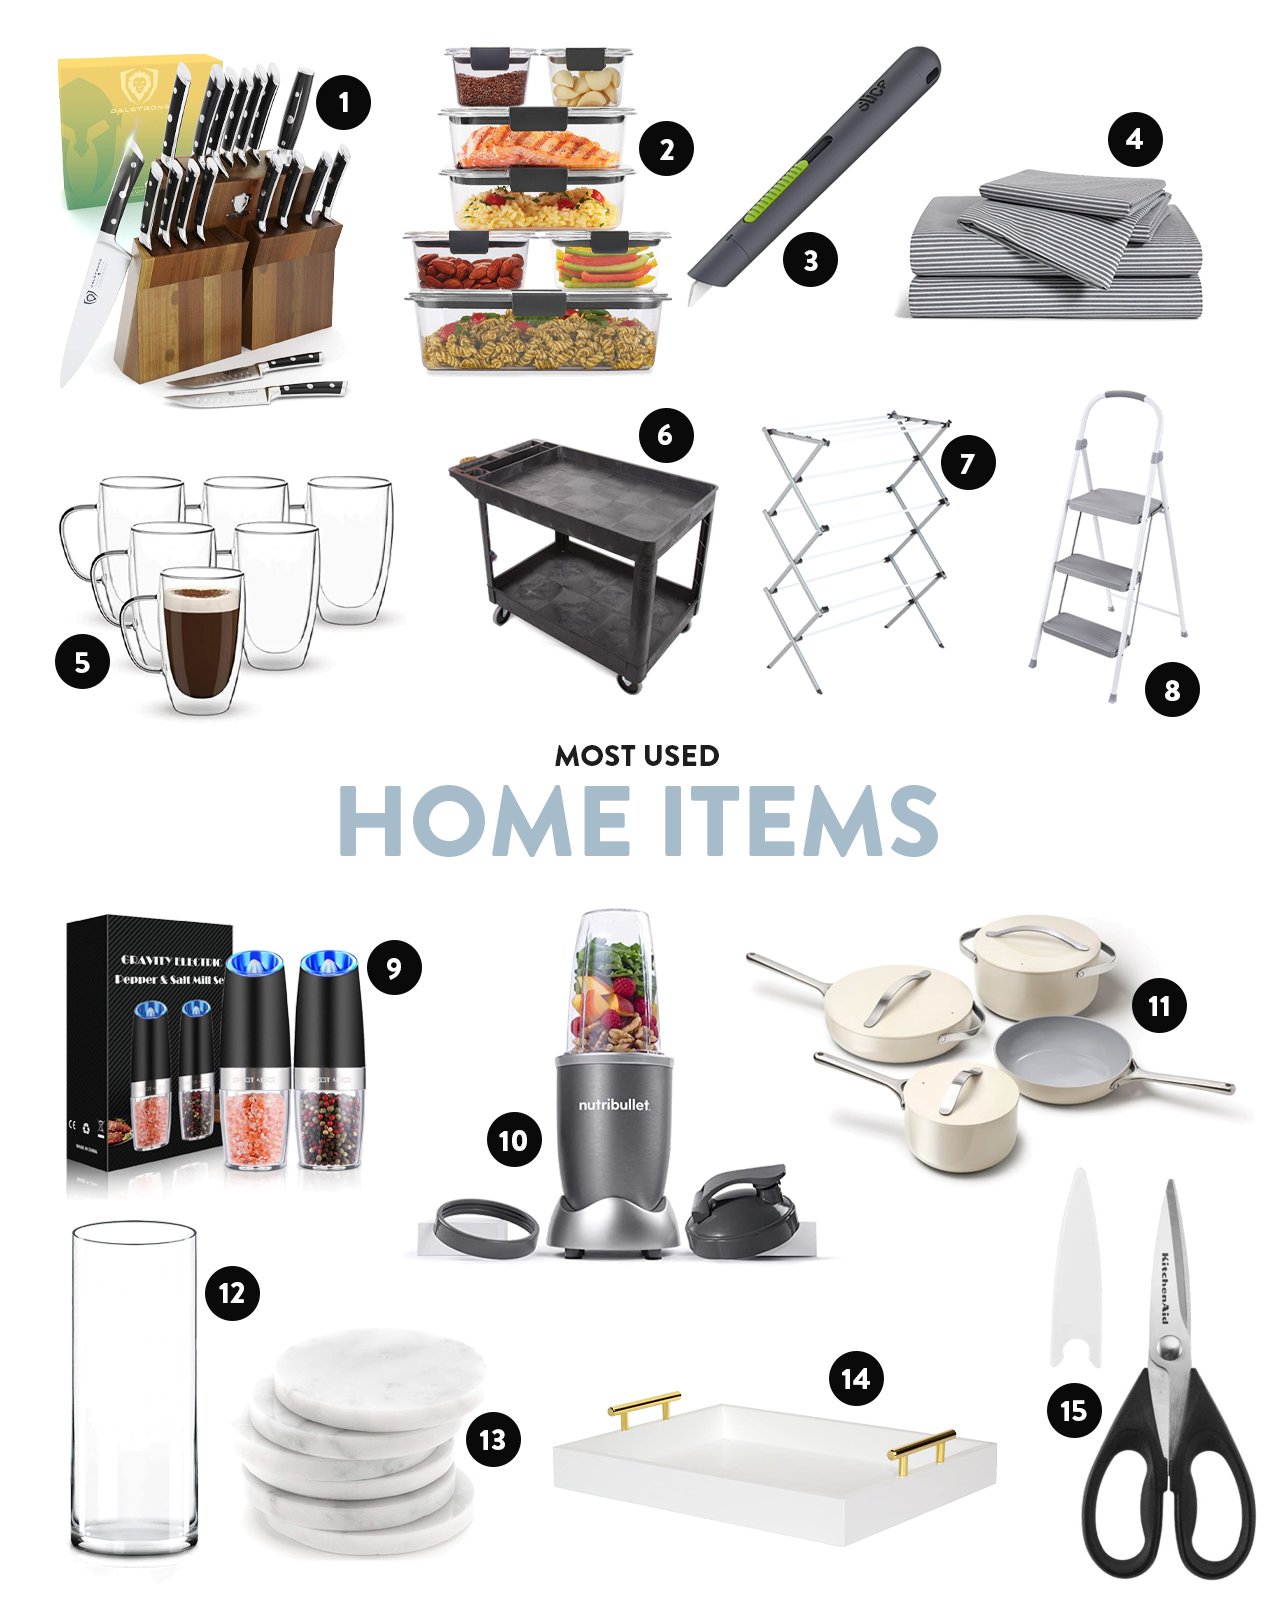 Home items